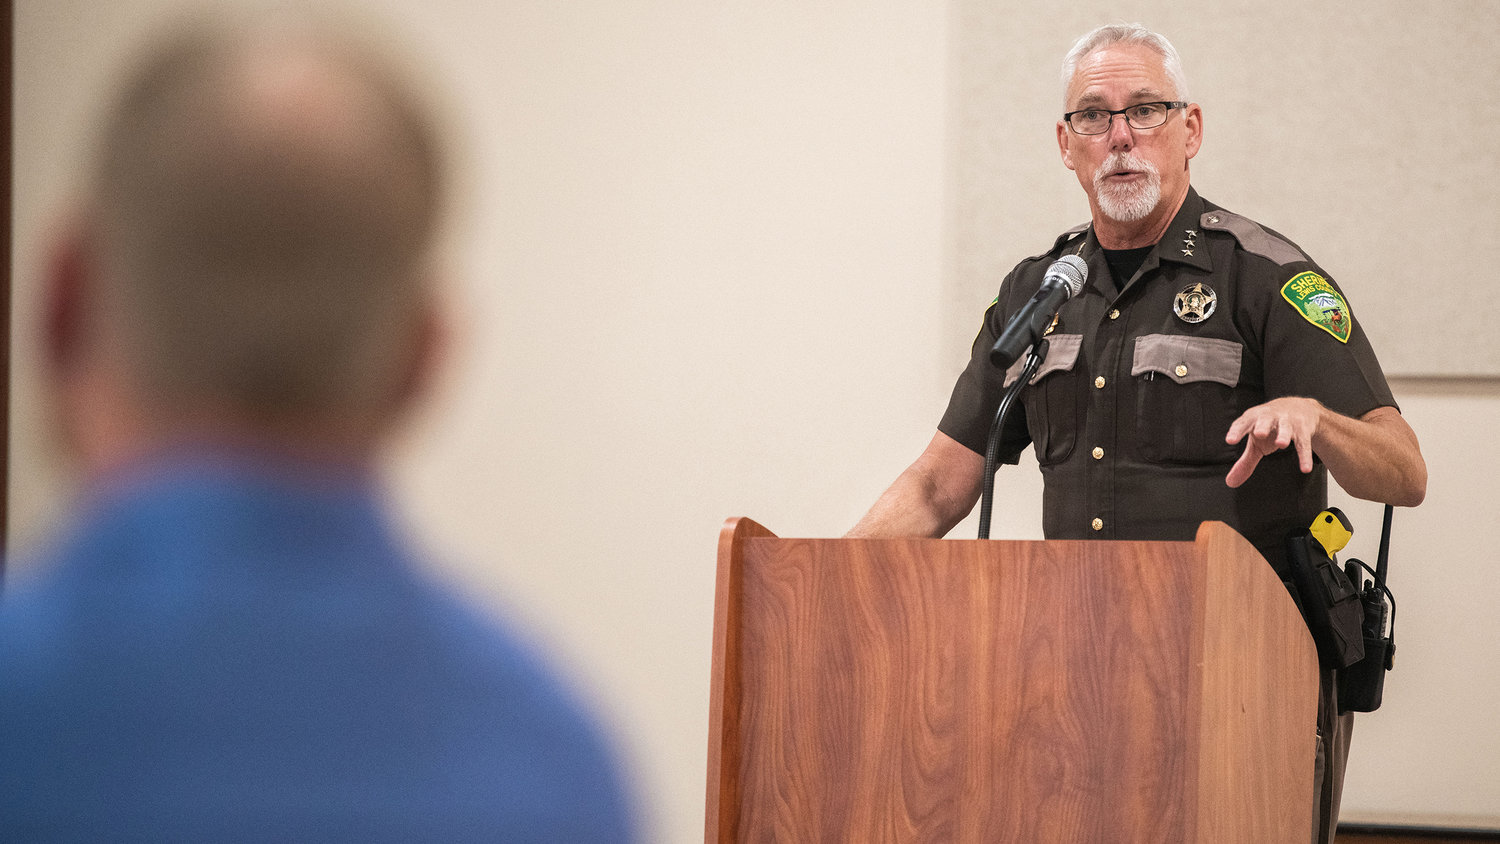 Lewis County Sheriff Rob Snaza describes instances that could have been avoided where rescues were made, during recent flooding, at the annual flood meeting held at Jester’s Auto Museum in Chehalis on Thursday.